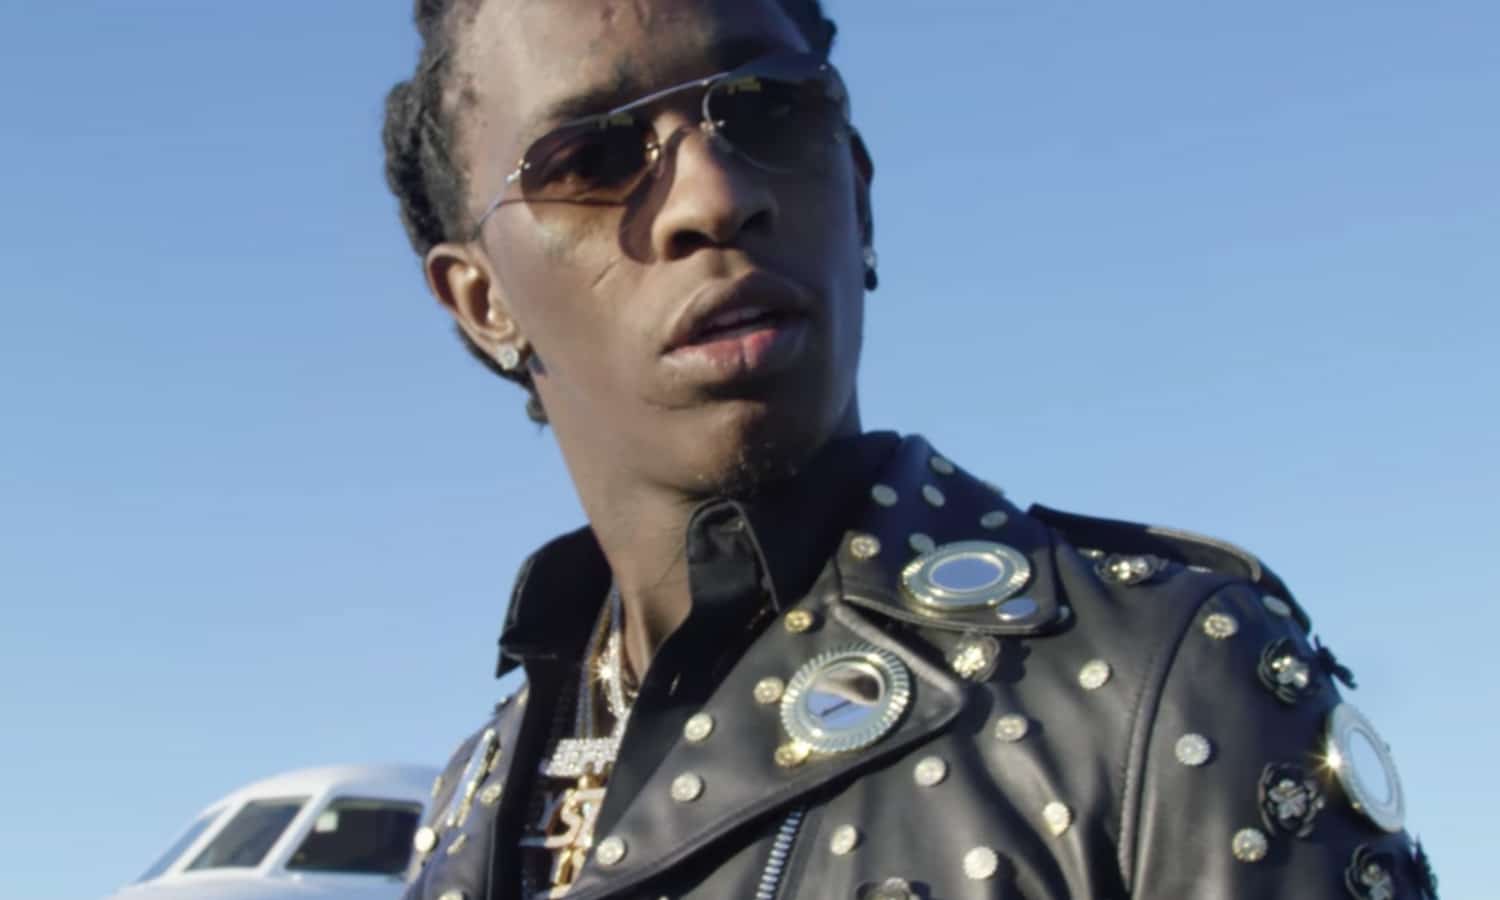 This Insane Young Thug Video Is Going Viral For The Best Reason